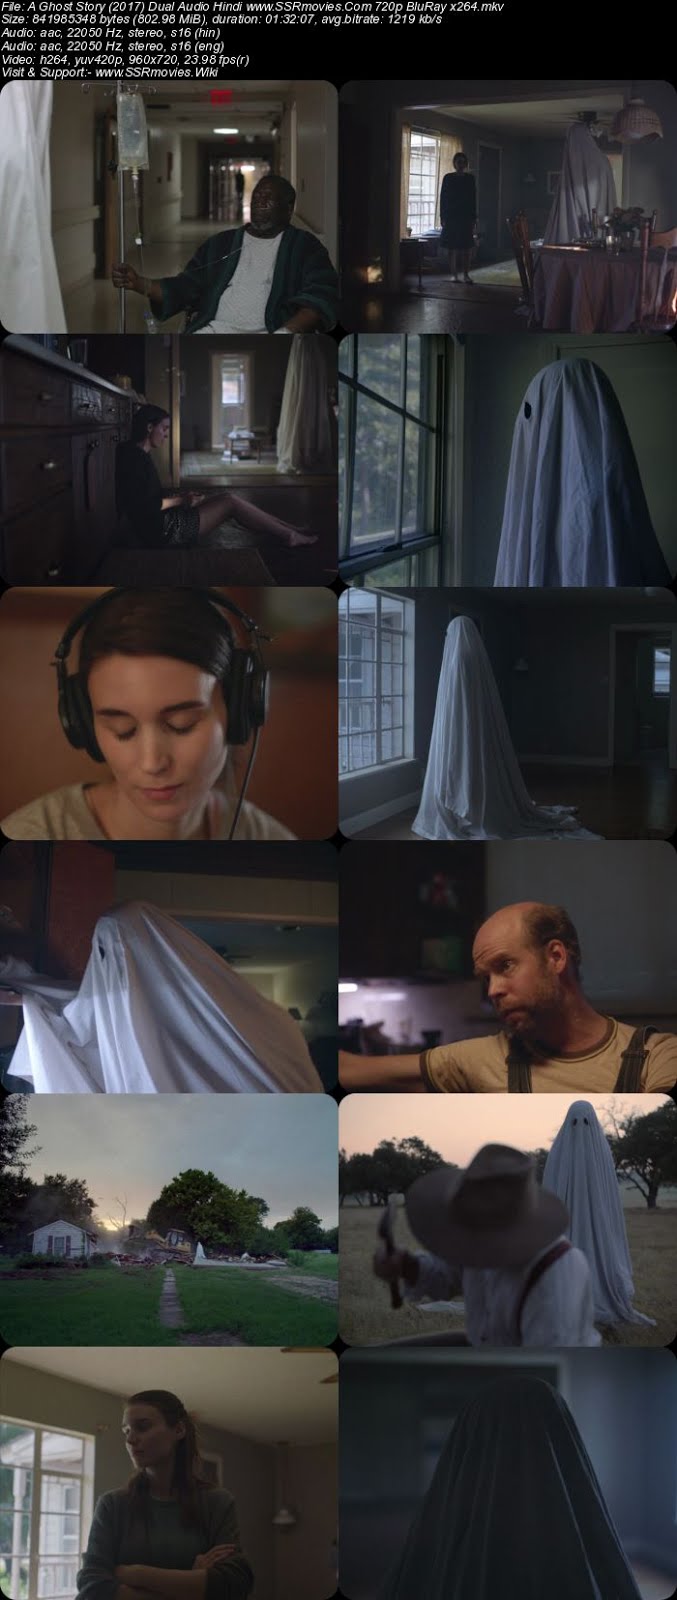 A Ghost Story (2017) Dual Audio Hindi 480p BluRay x264 300MB Movie Download